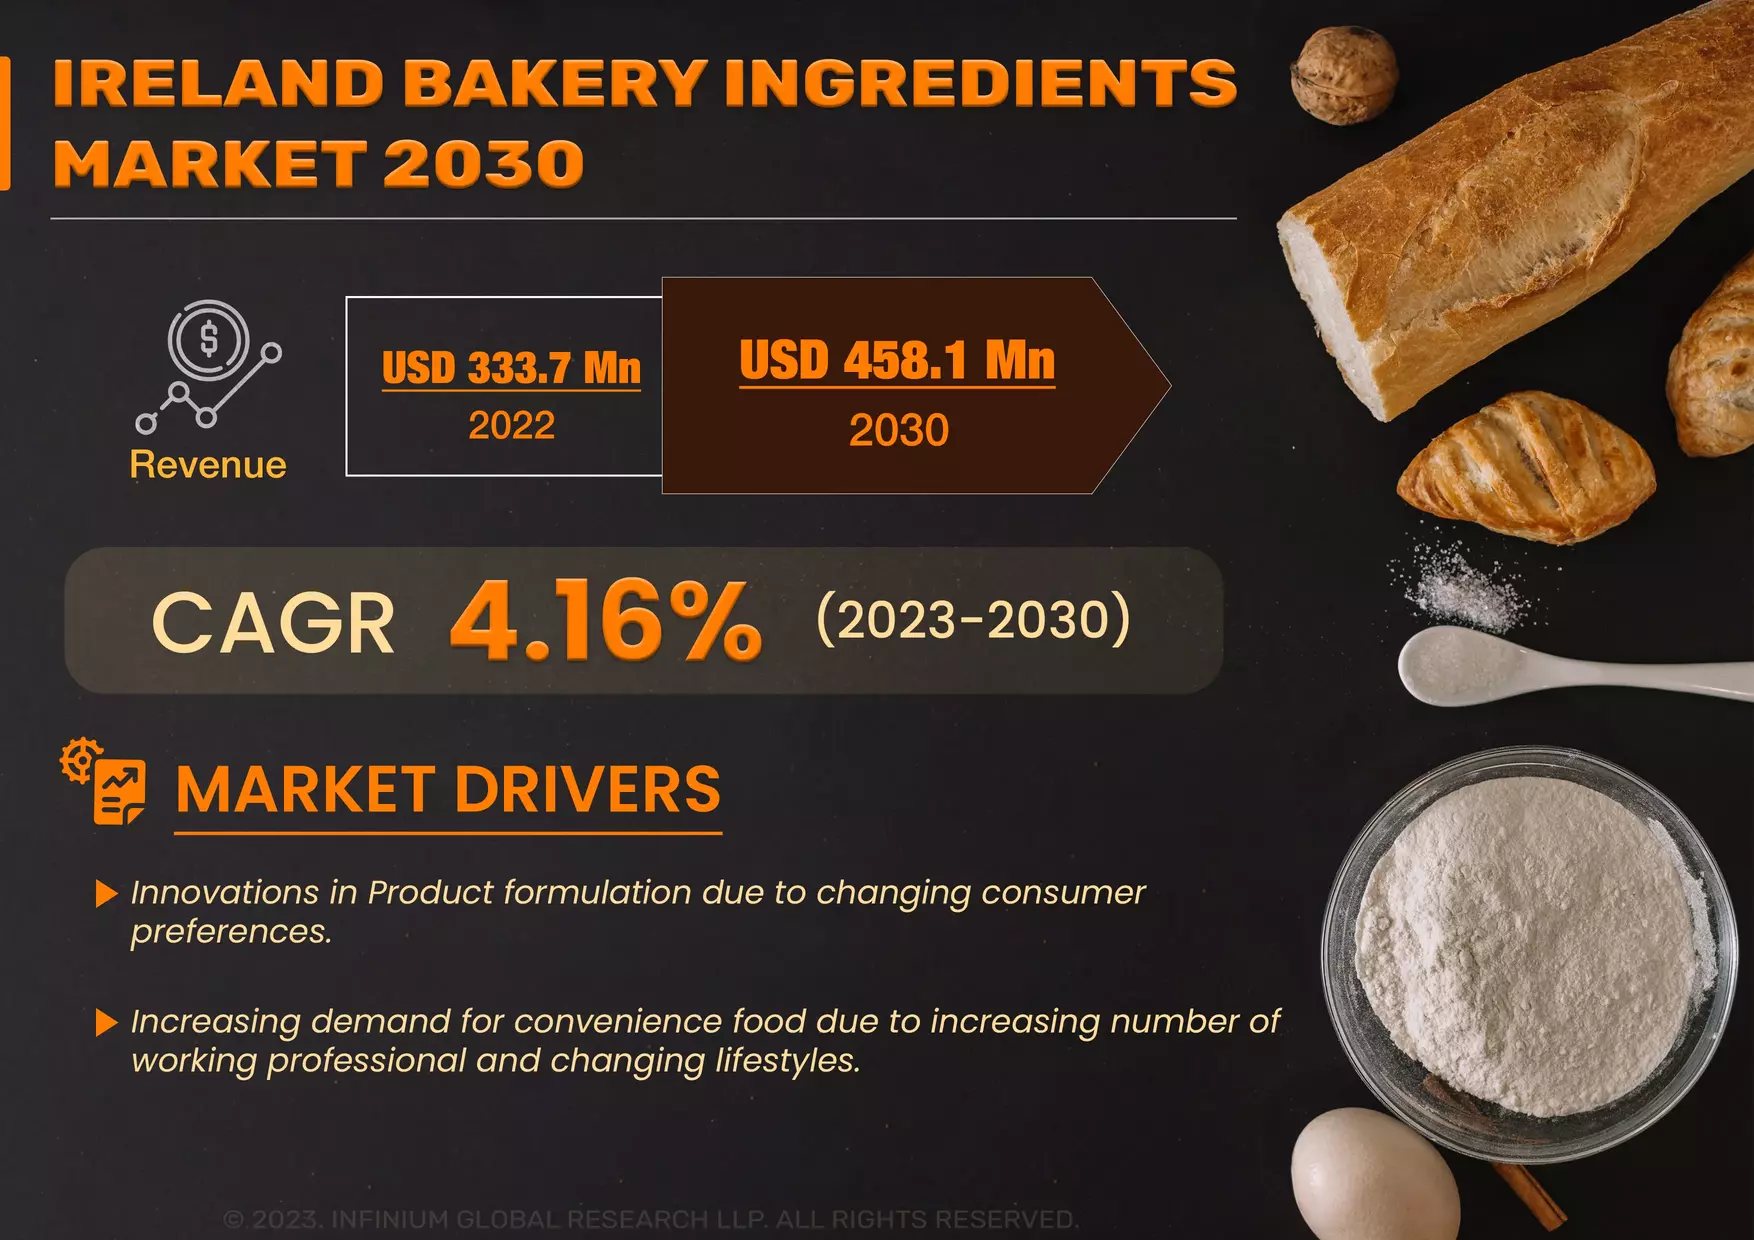 Ireland Bakery Ingredients Market was Valued at USD 333.7 Million in 2022 and is Expected to Reach USD 458.1 Million by 2030 and Grow at a CAGR Of 4.16% Over the Forecast Period.